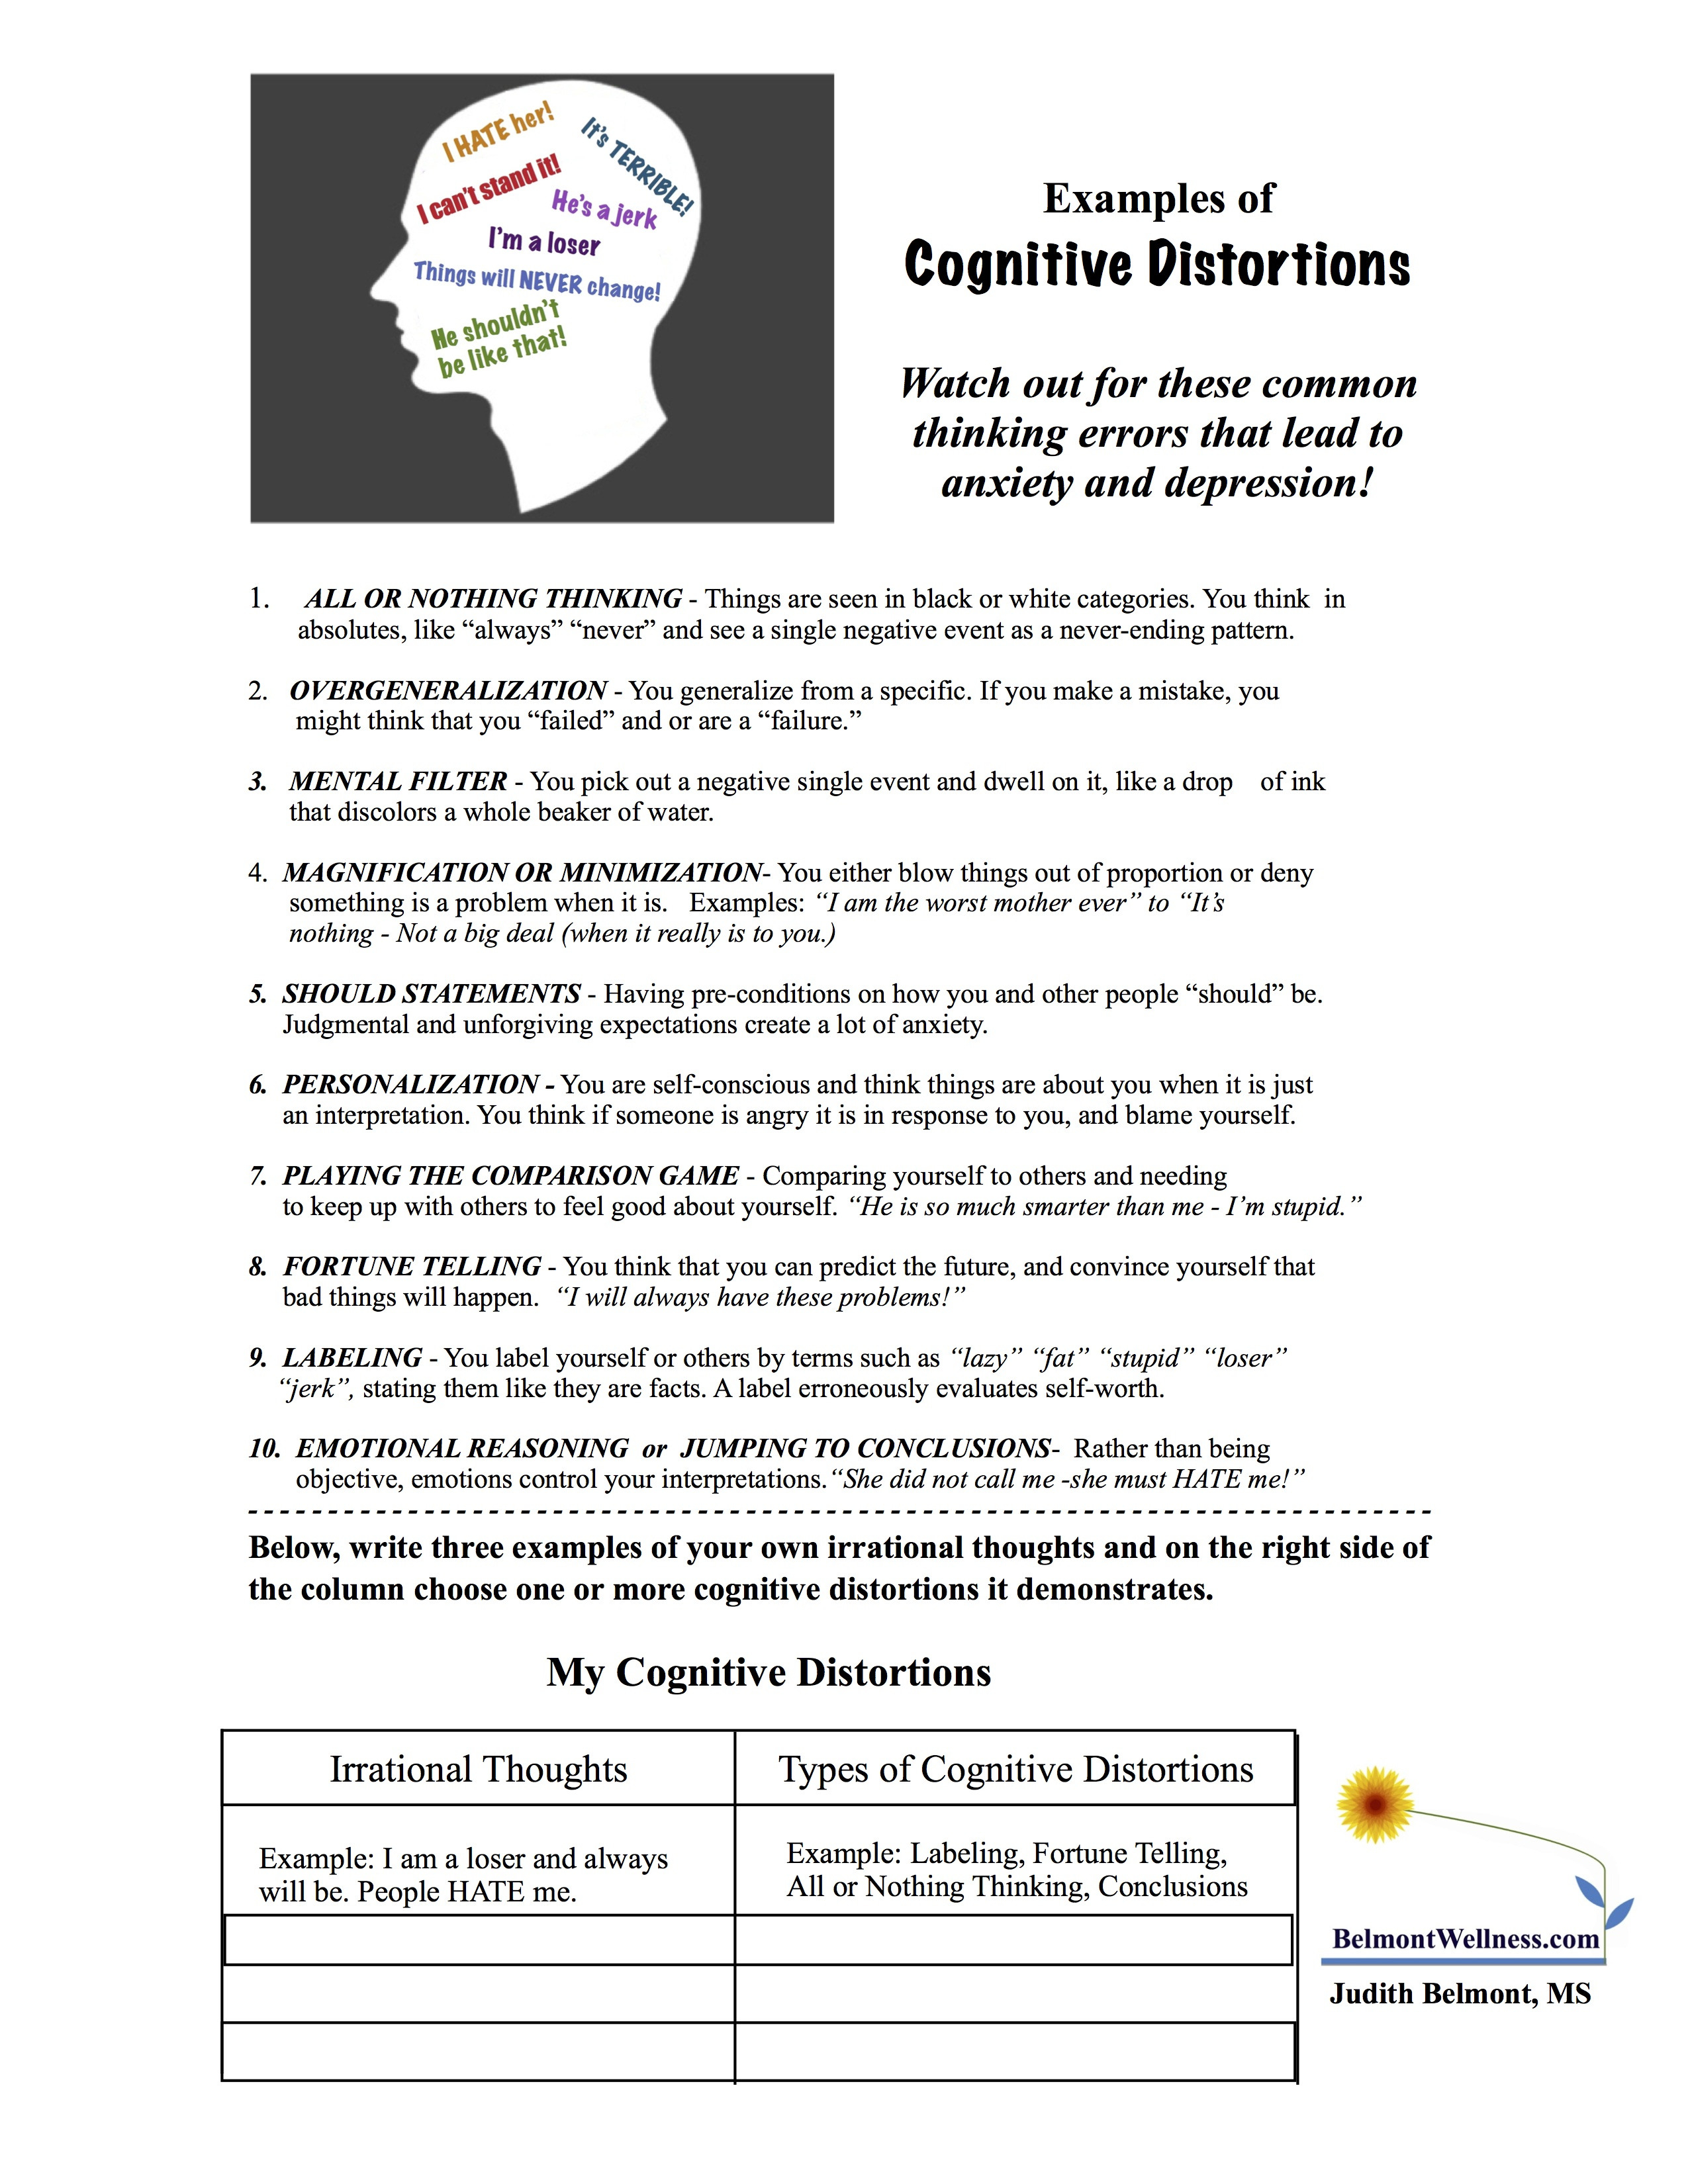 anxiety worksheets for adults db excelcom